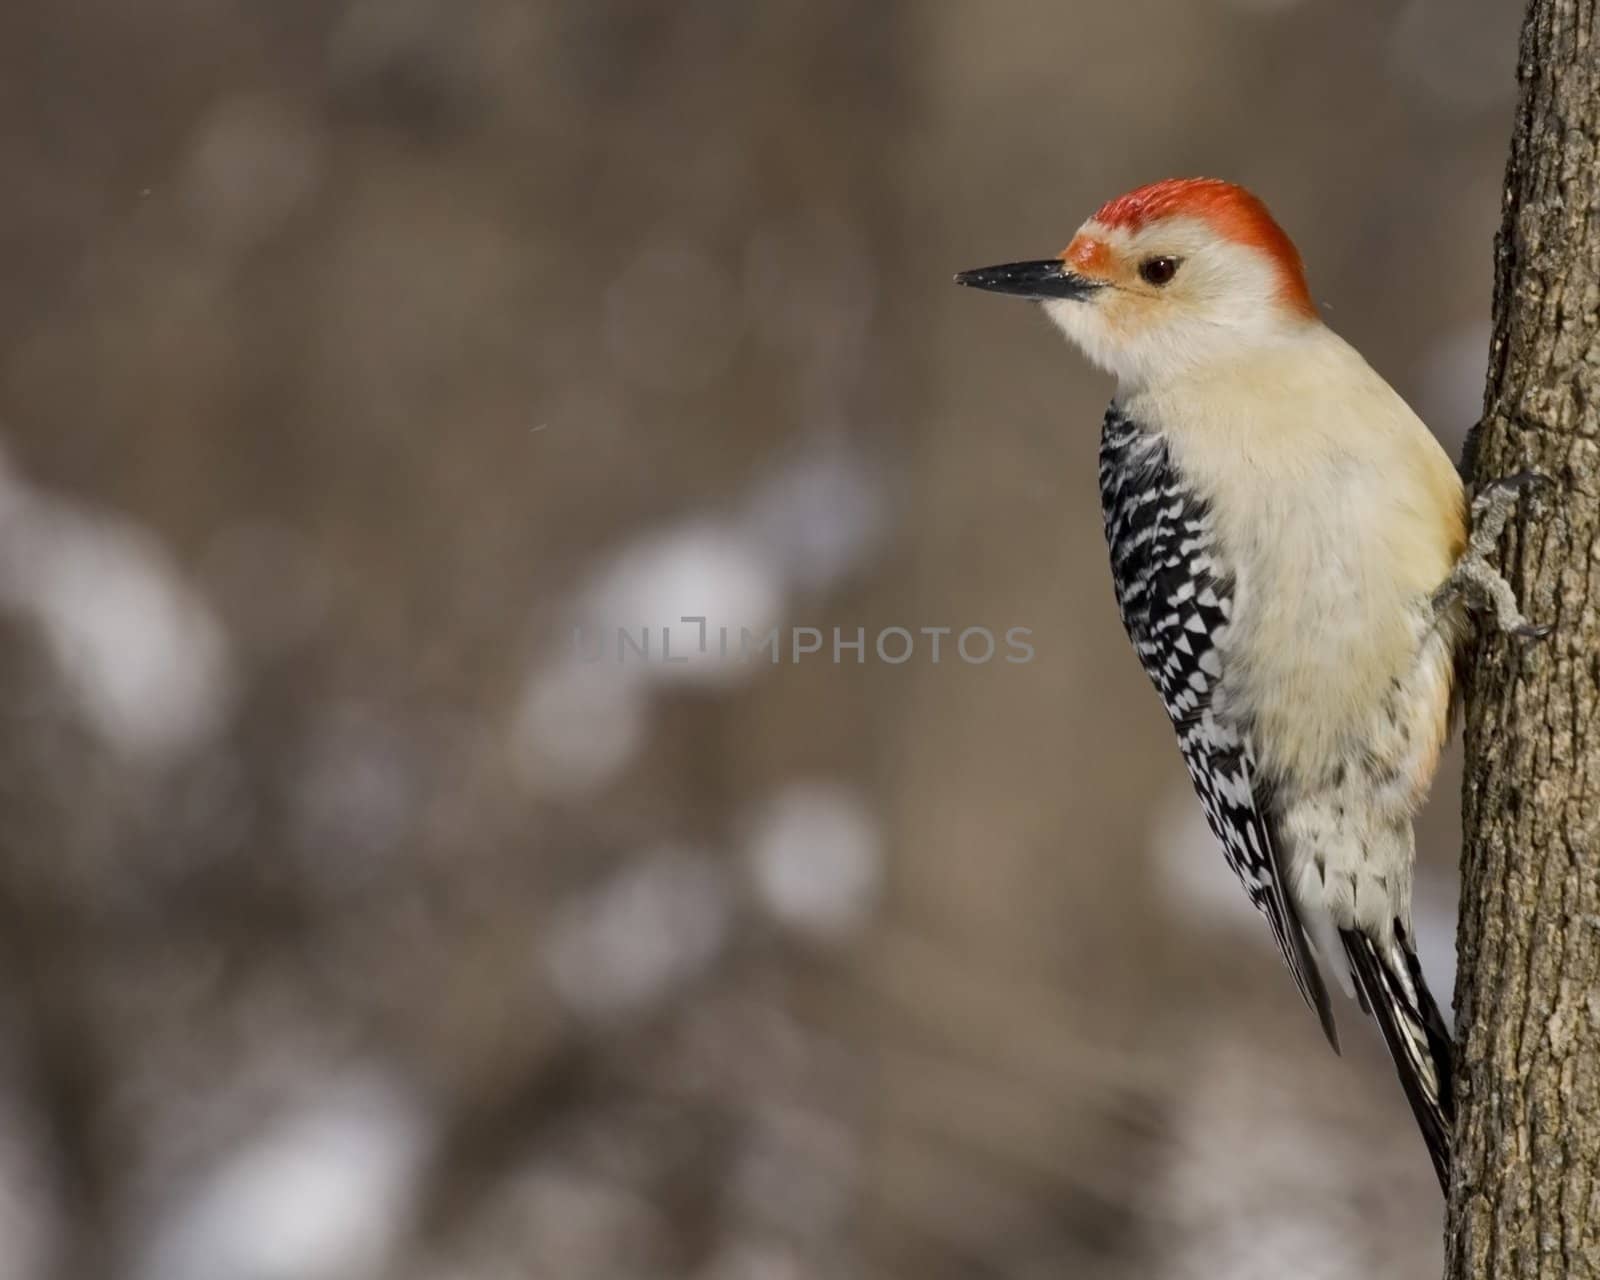 Red-bellied woodpecker perched on a tree trunk.